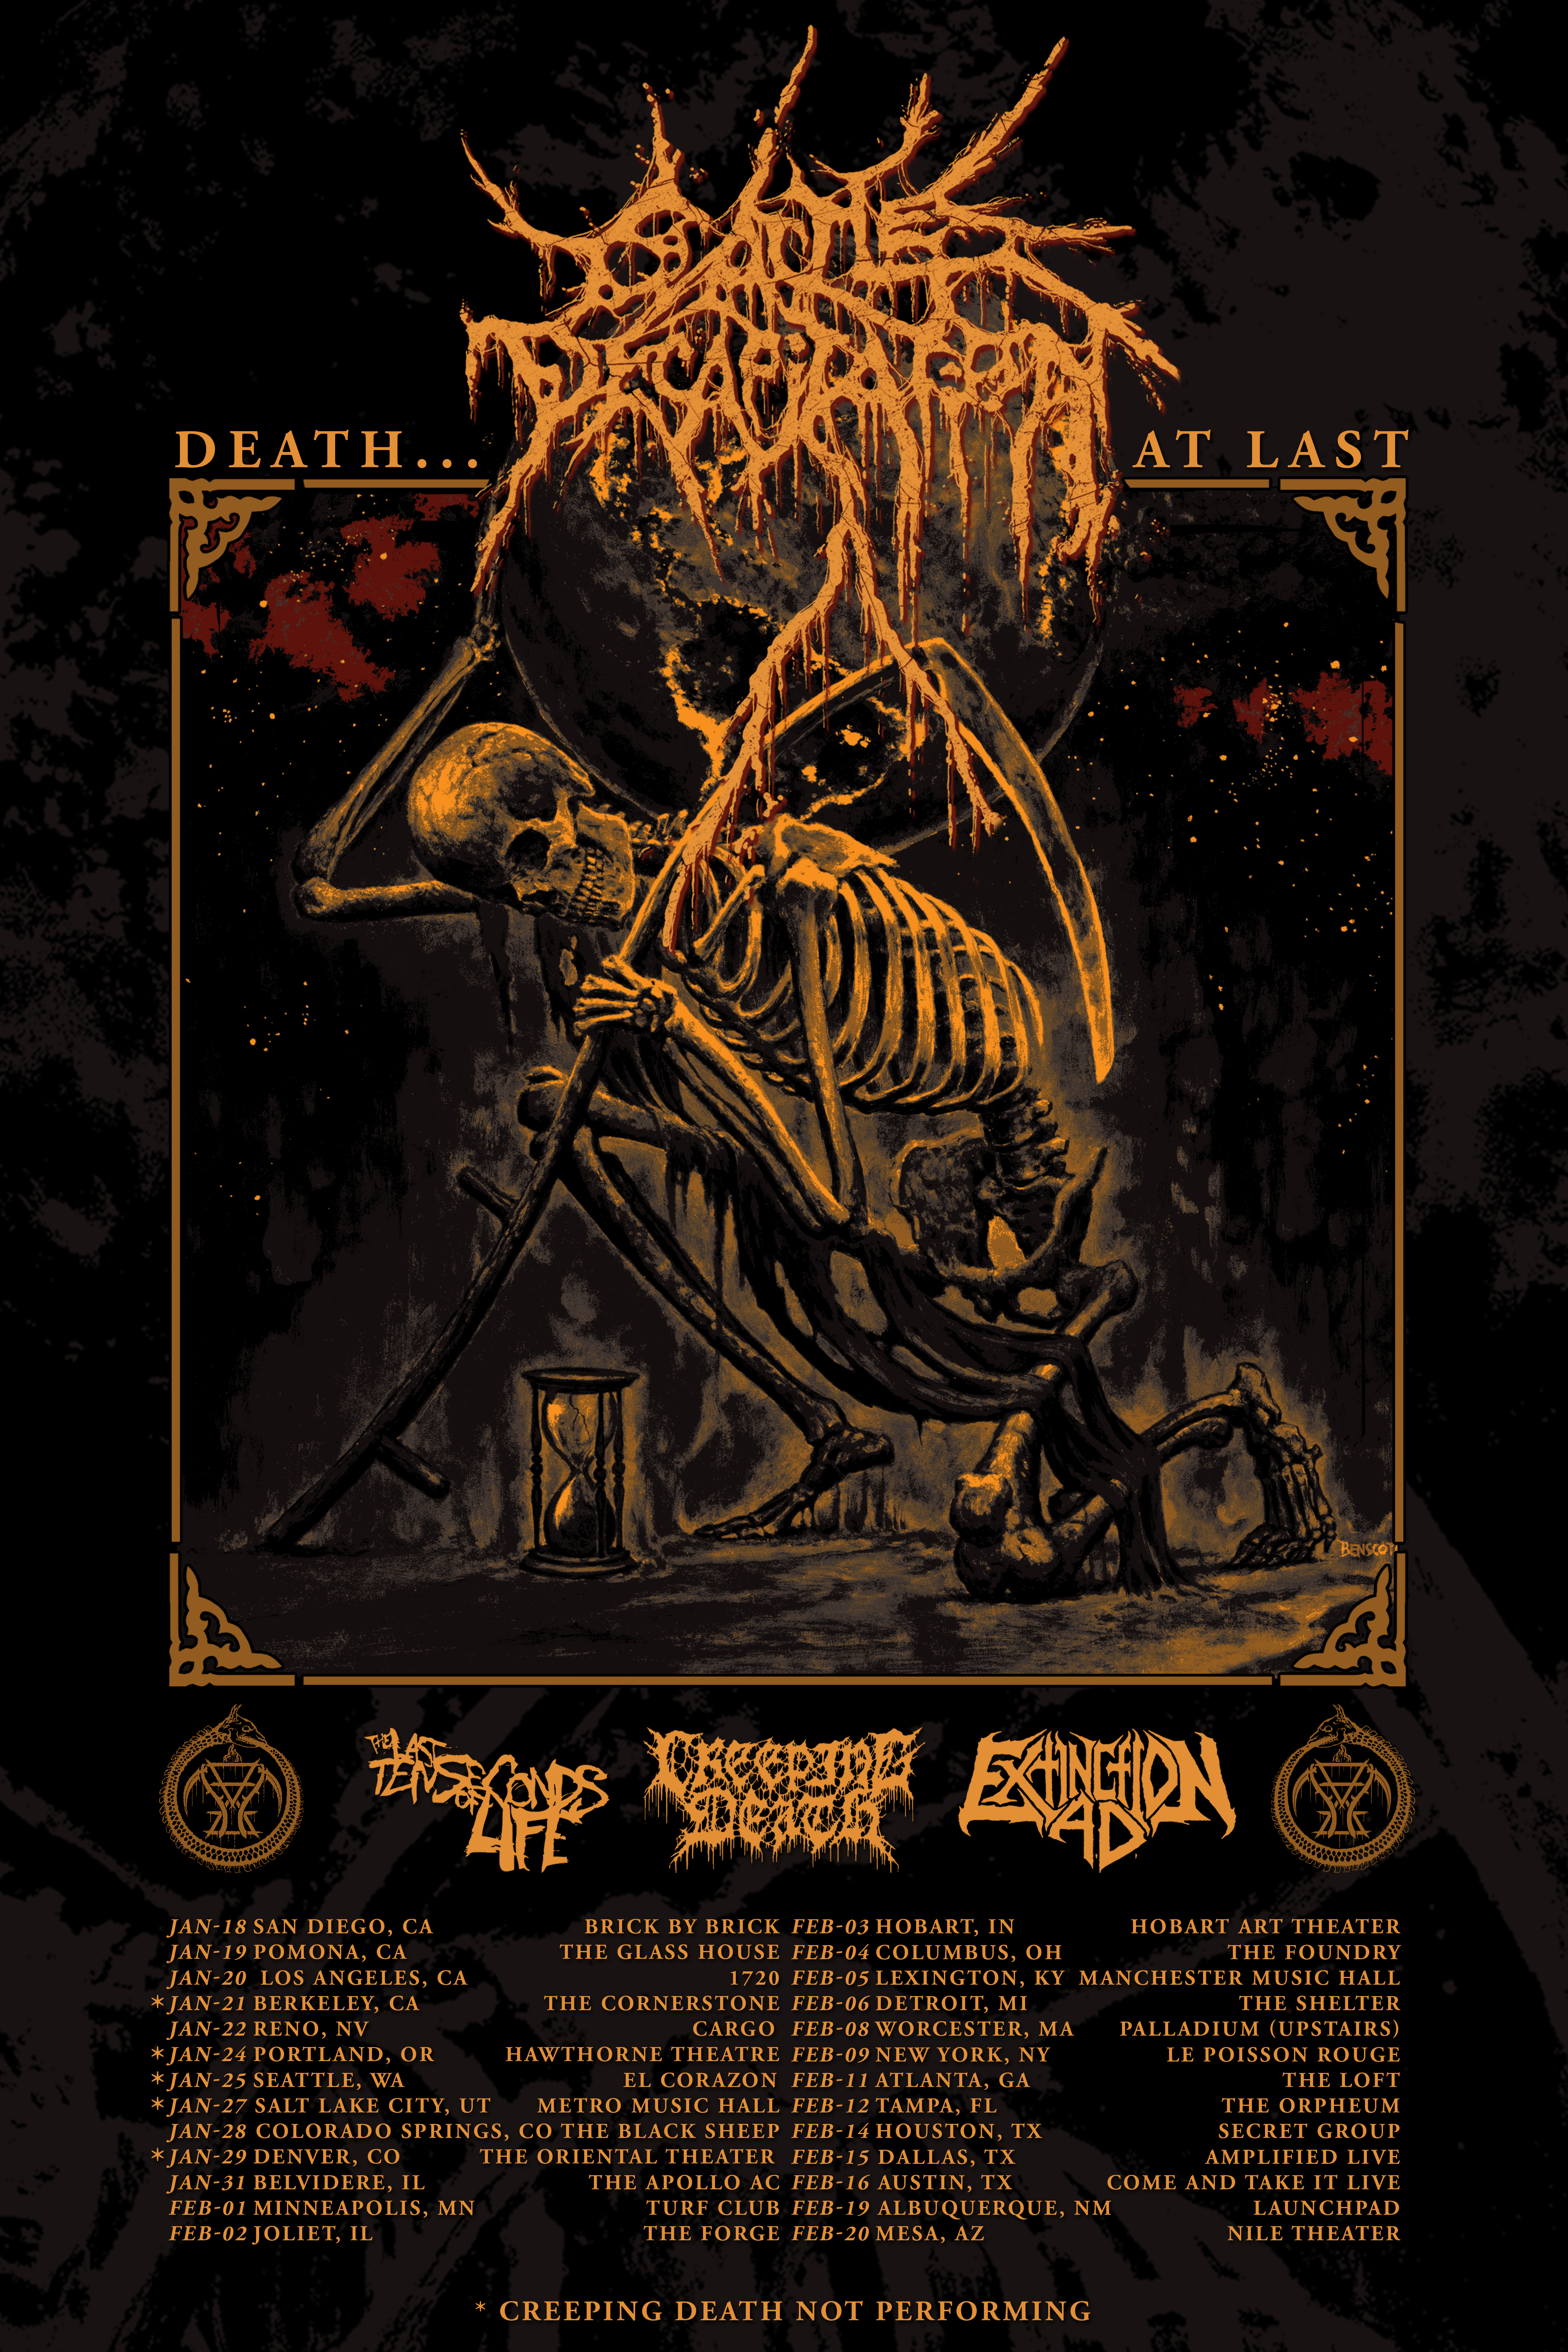 CATTLE DECAPITATION Announces Death…At Last Headlining Tour With The Last Ten Seconds Of Life, Creeping Death, And Extinction A.D.